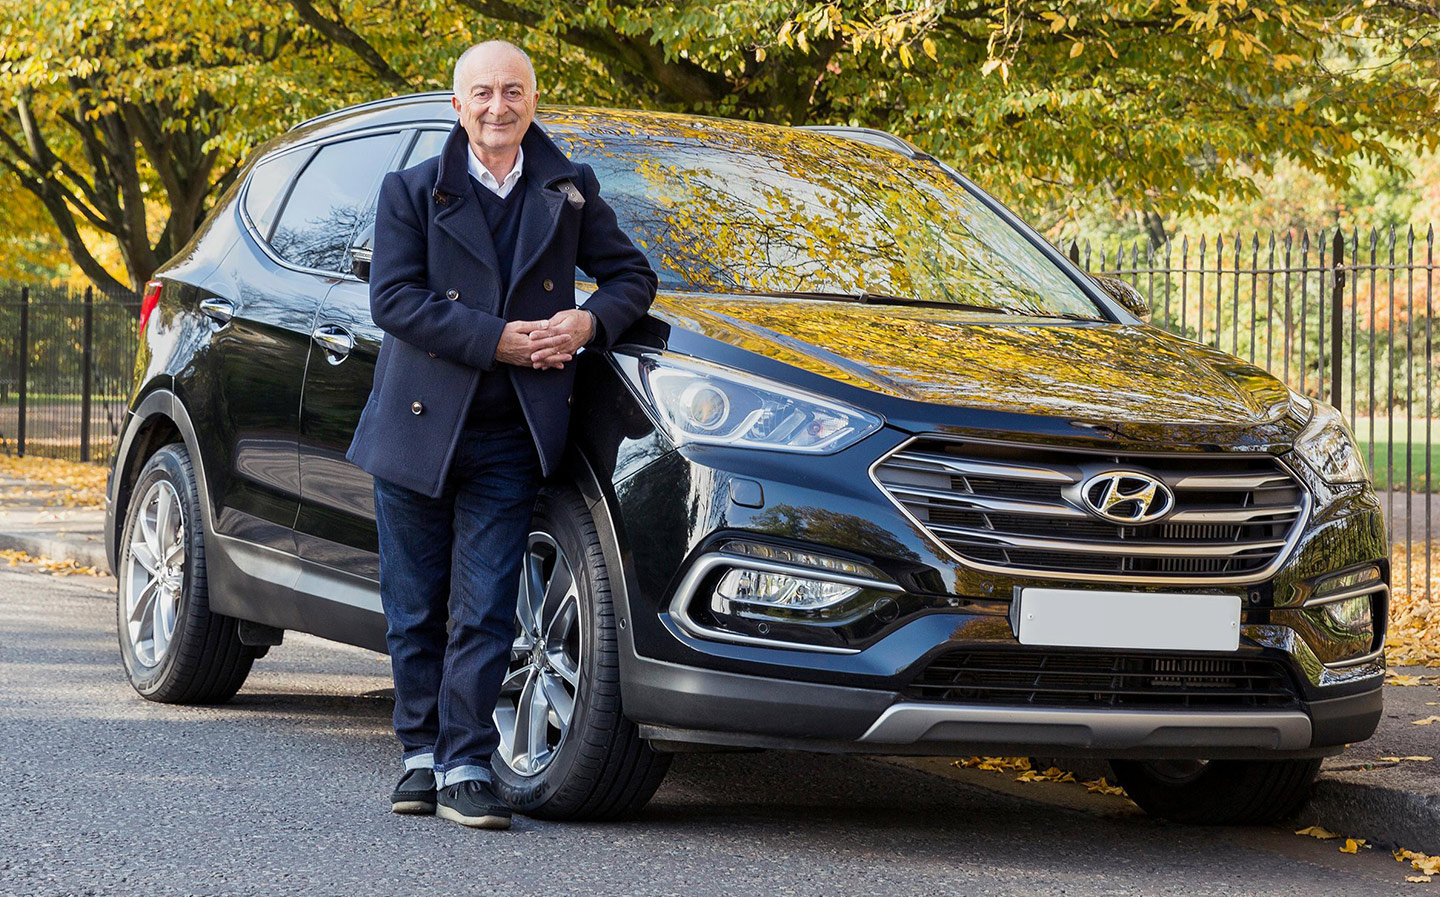 Me and My Motor: Tony Robinson, actor and TV presenter